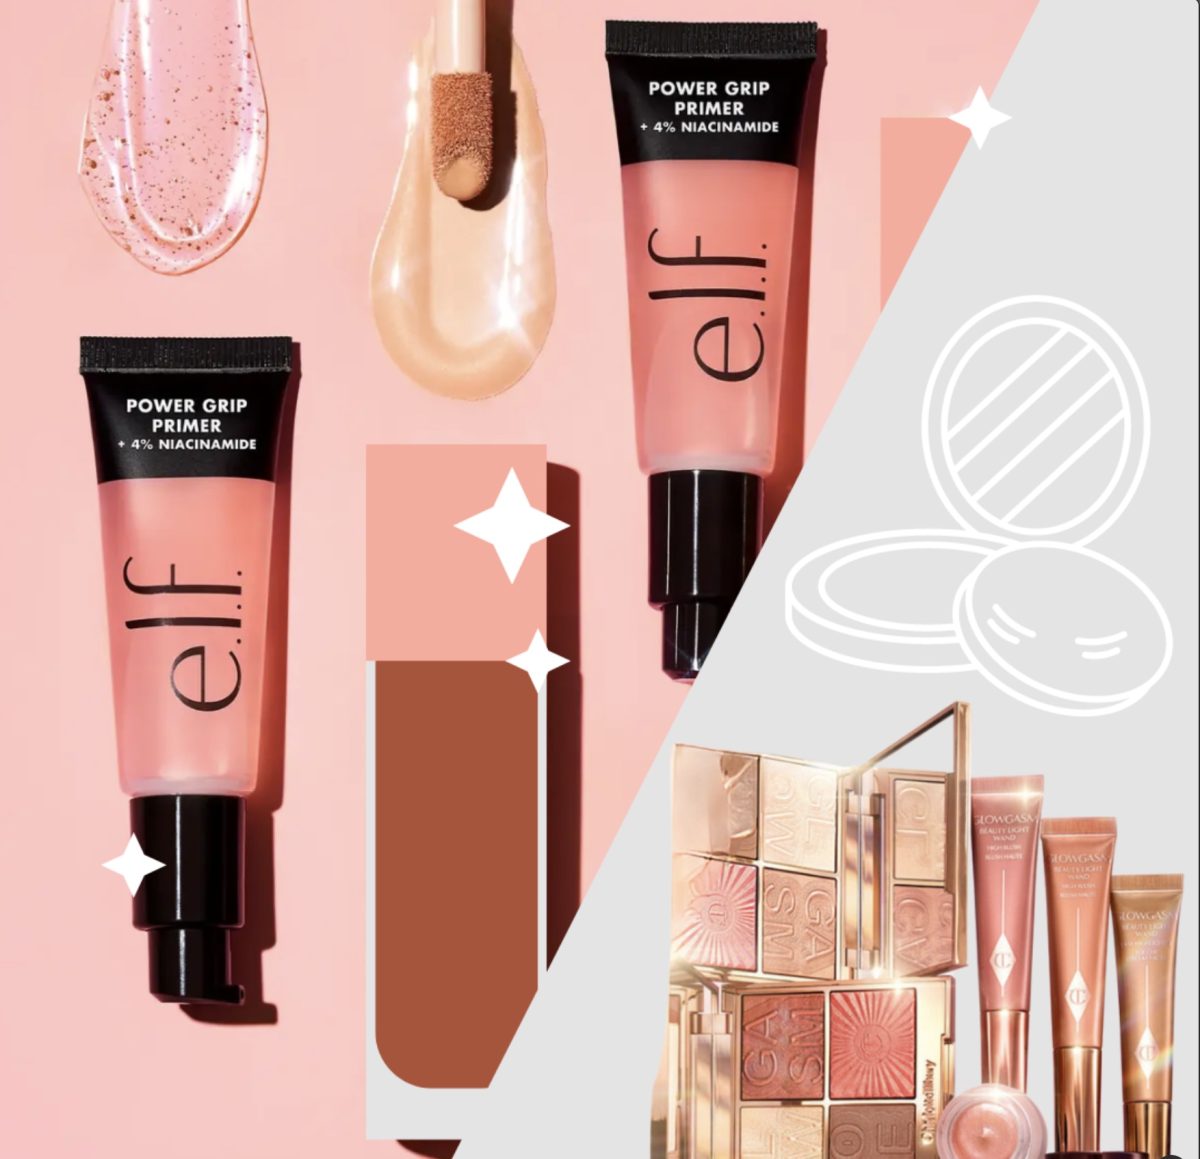 Elf+and+Charlotte+Tilbury+products+posed+next+to+each+other.+%28Credit%3A+Abby+Fisher%29+